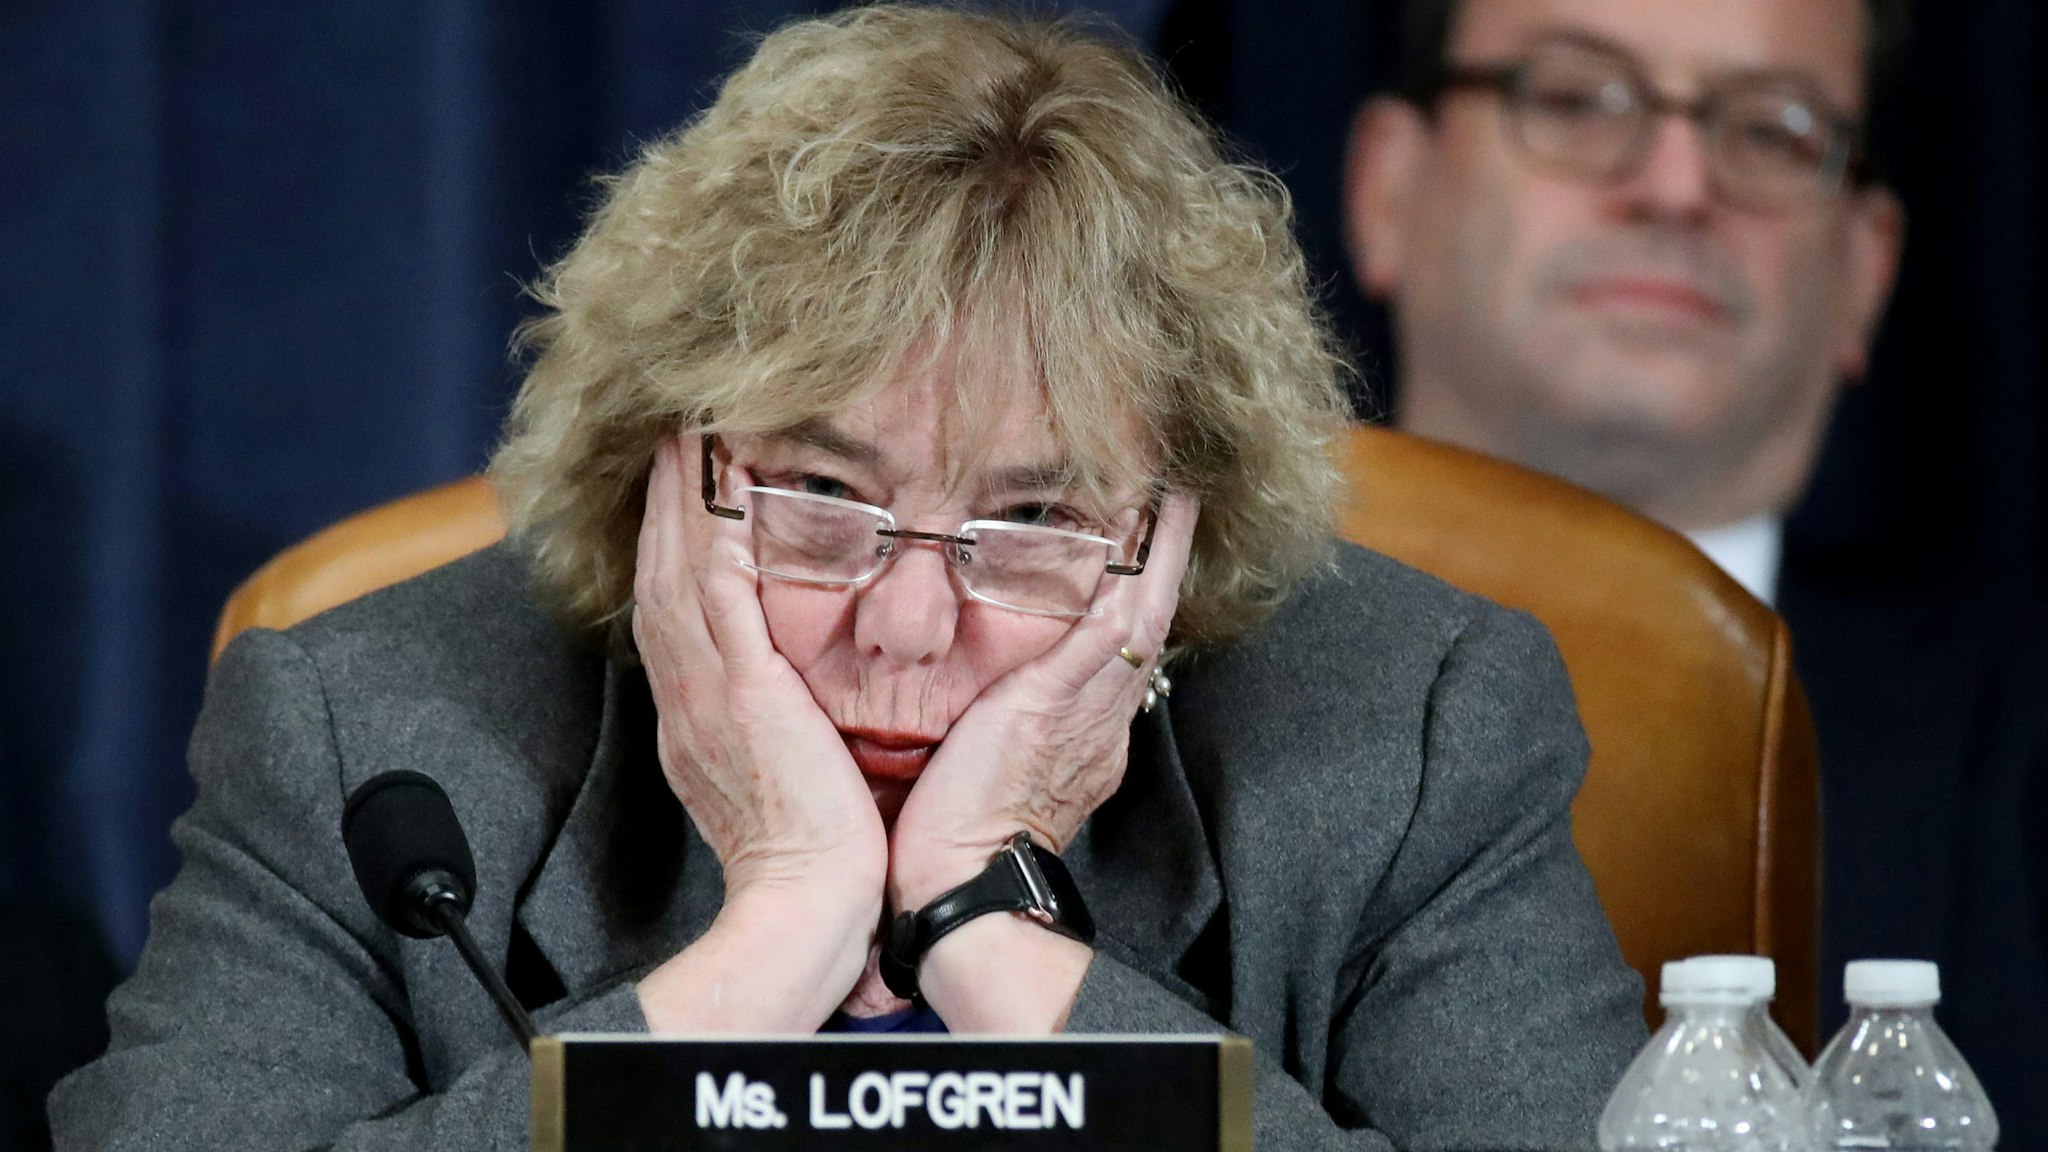 WASHINGTON, DC - DECEMBER 04: Rep. Zoe Lofgren (D-CA) listens as constitutional scholars testify before the House Judiciary Committee in the Longworth House Office Building on Capitol Hill December 4, 2019 in Washington, DC. This is the first hearing held by the House Judiciary Committee in the impeachment inquiry against U.S. President Donald Trump, whom House Democrats say held back military aid for Ukraine while demanding it investigate his political rivals. The Judiciary Committee will decide whether to draft official articles of impeachment against President Trump to be voted on by the full House of Representatives.